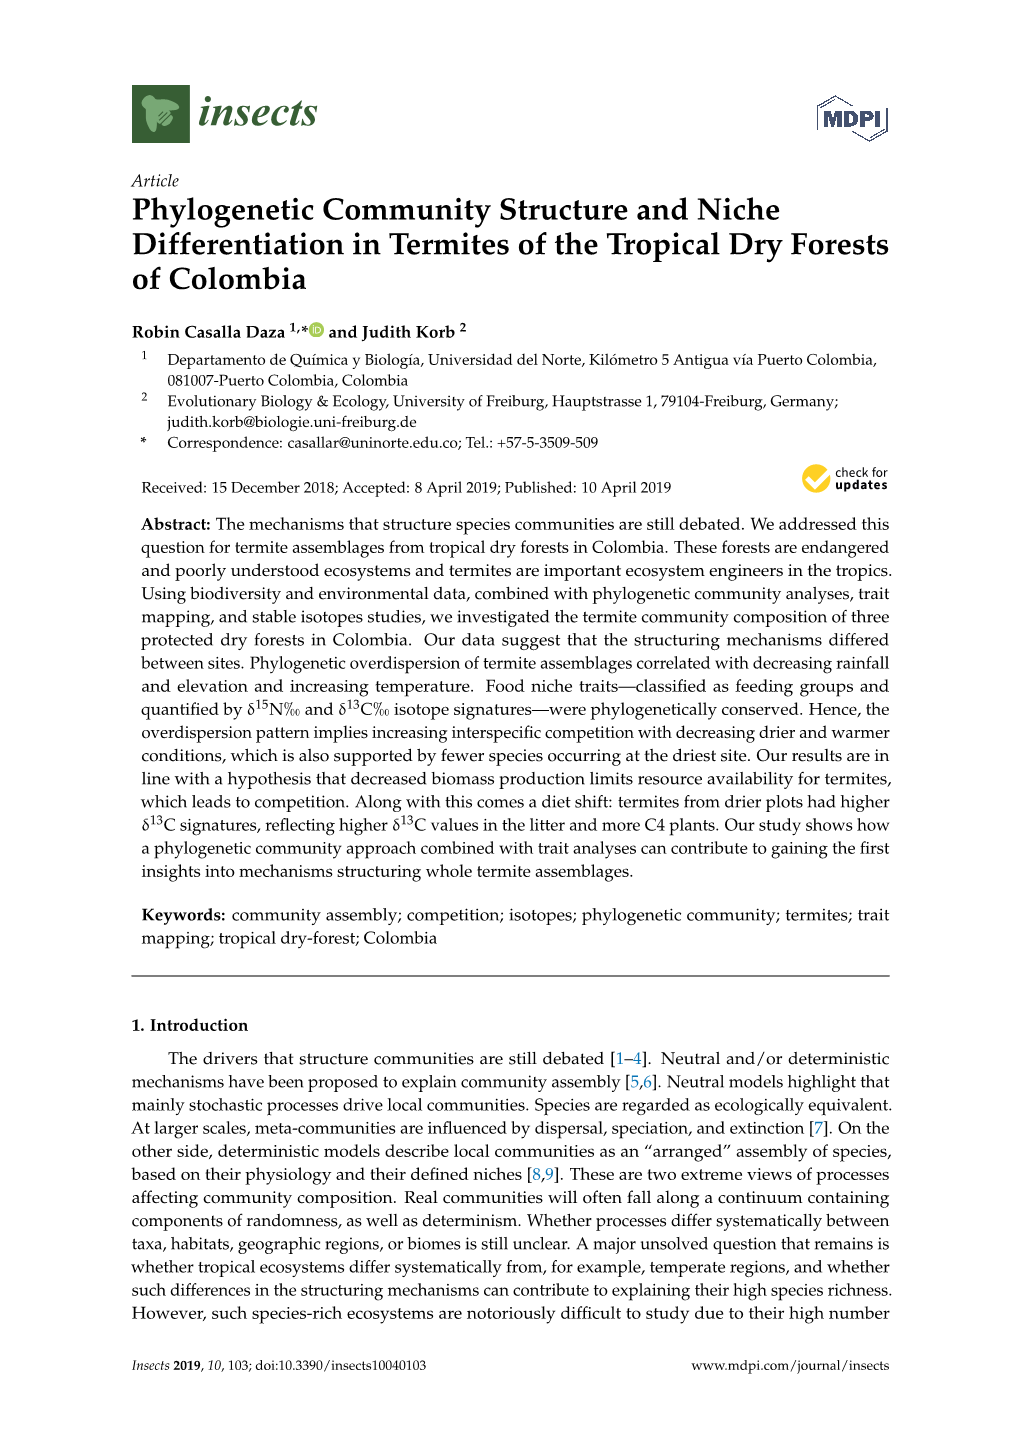 Phylogenetic Community Structure and Niche Differentiation in Termites of the Tropical Dry Forests of Colombia